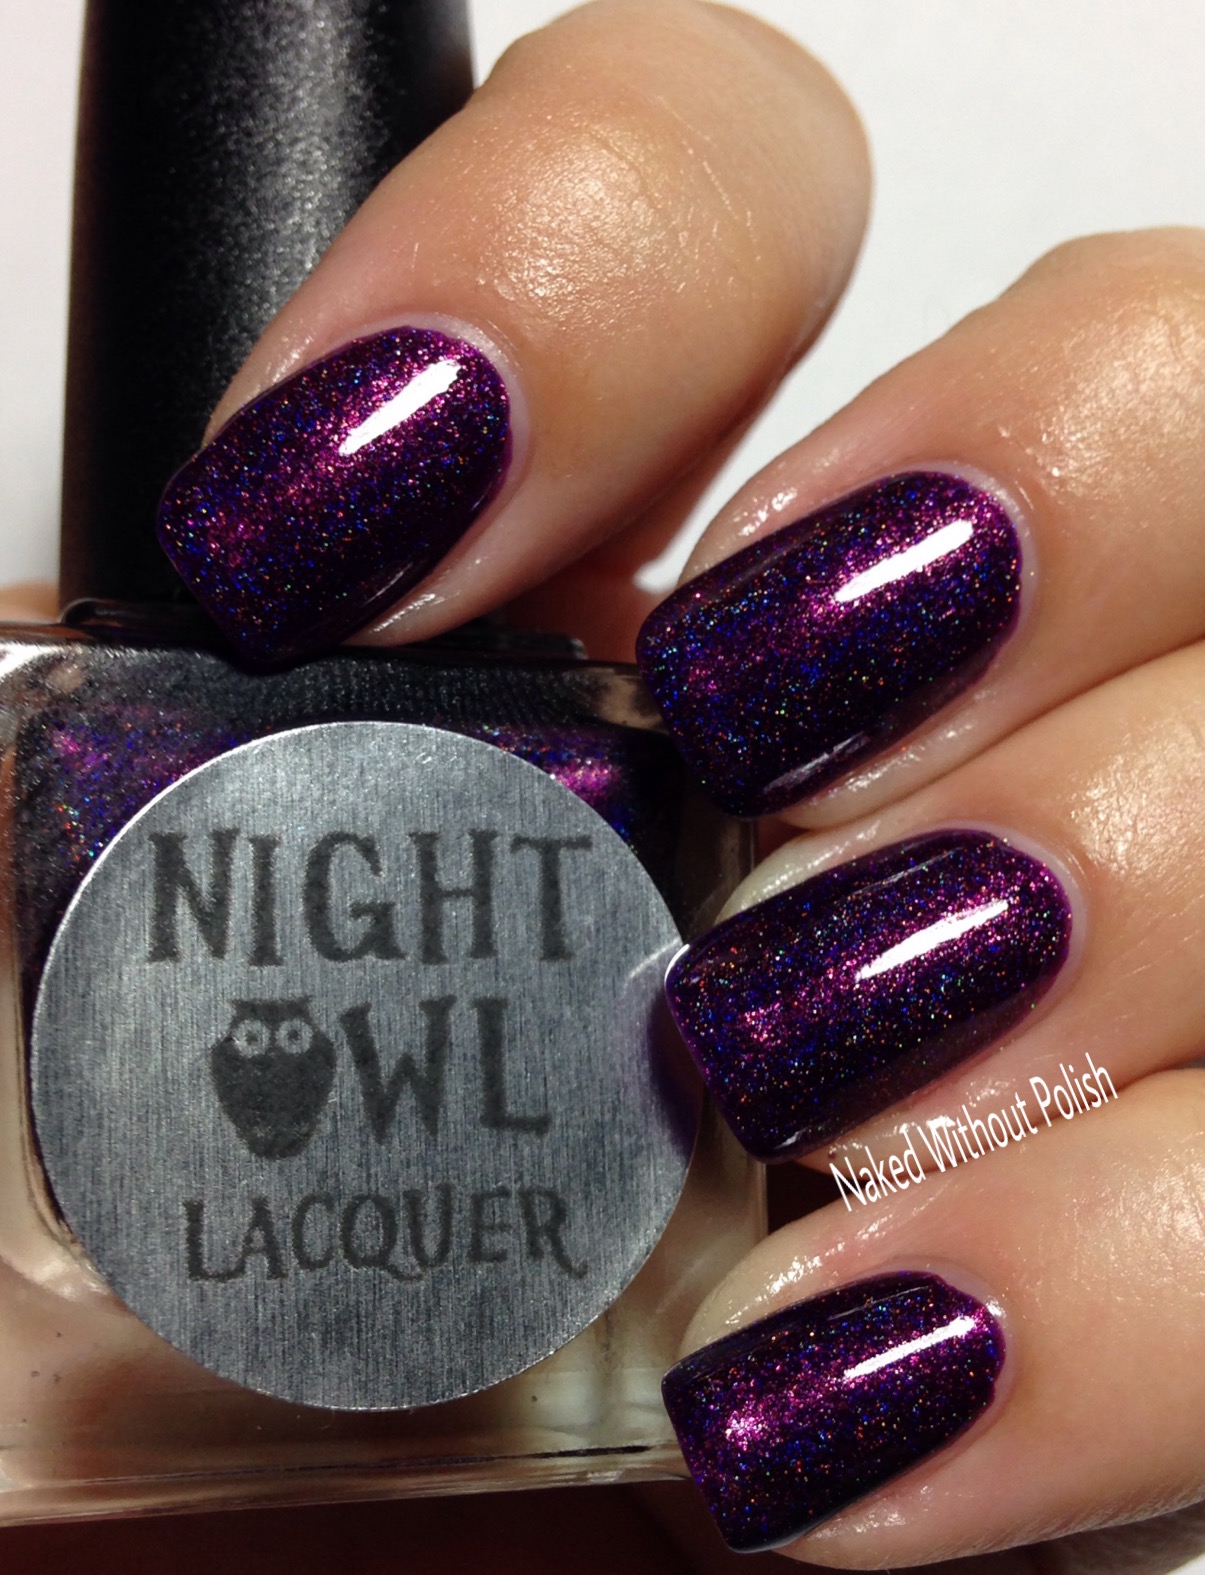 Polish-Pickup-Night-Owl-Lacquer-Fierce-and-Feisty-11